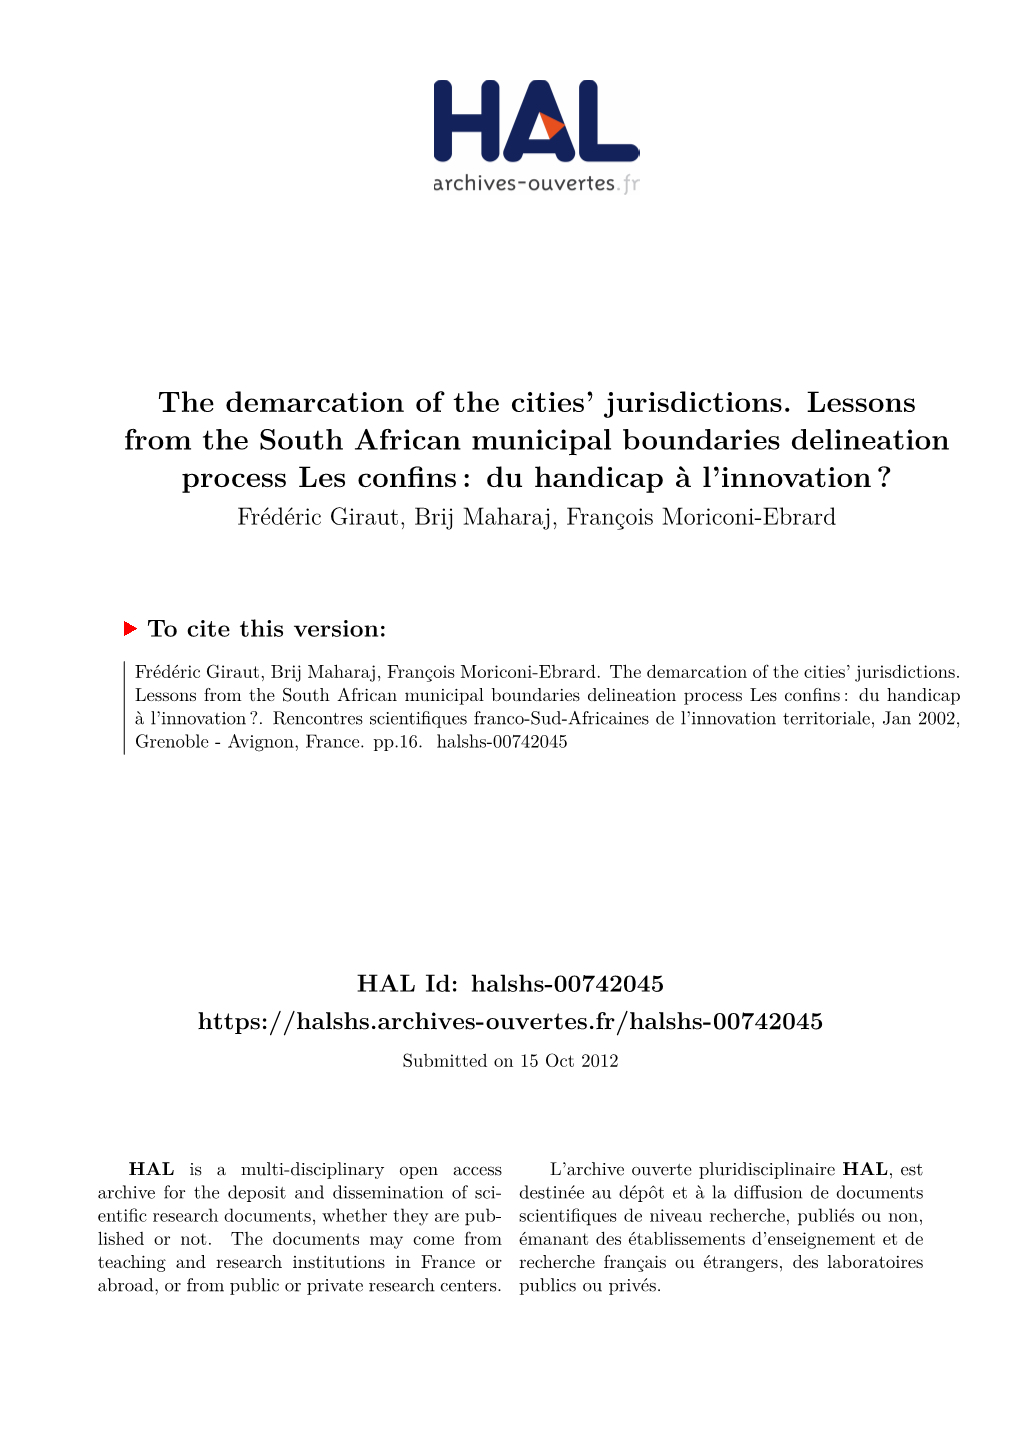 The Demarcation of the Cities' Jurisdictions. Lessons from The